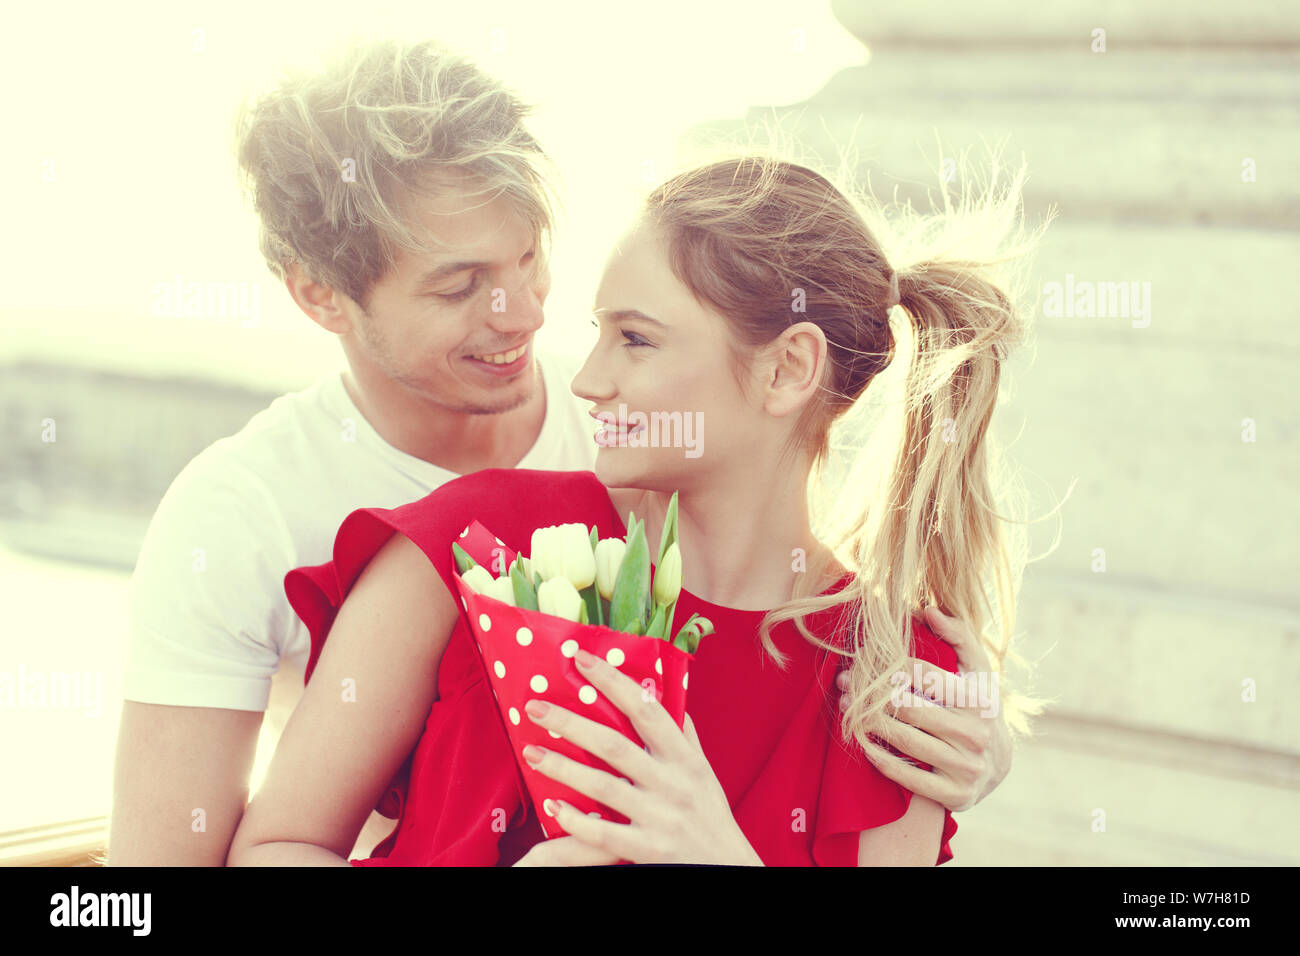 Man in love embracing woman with bouquet outdoors Stock Photo